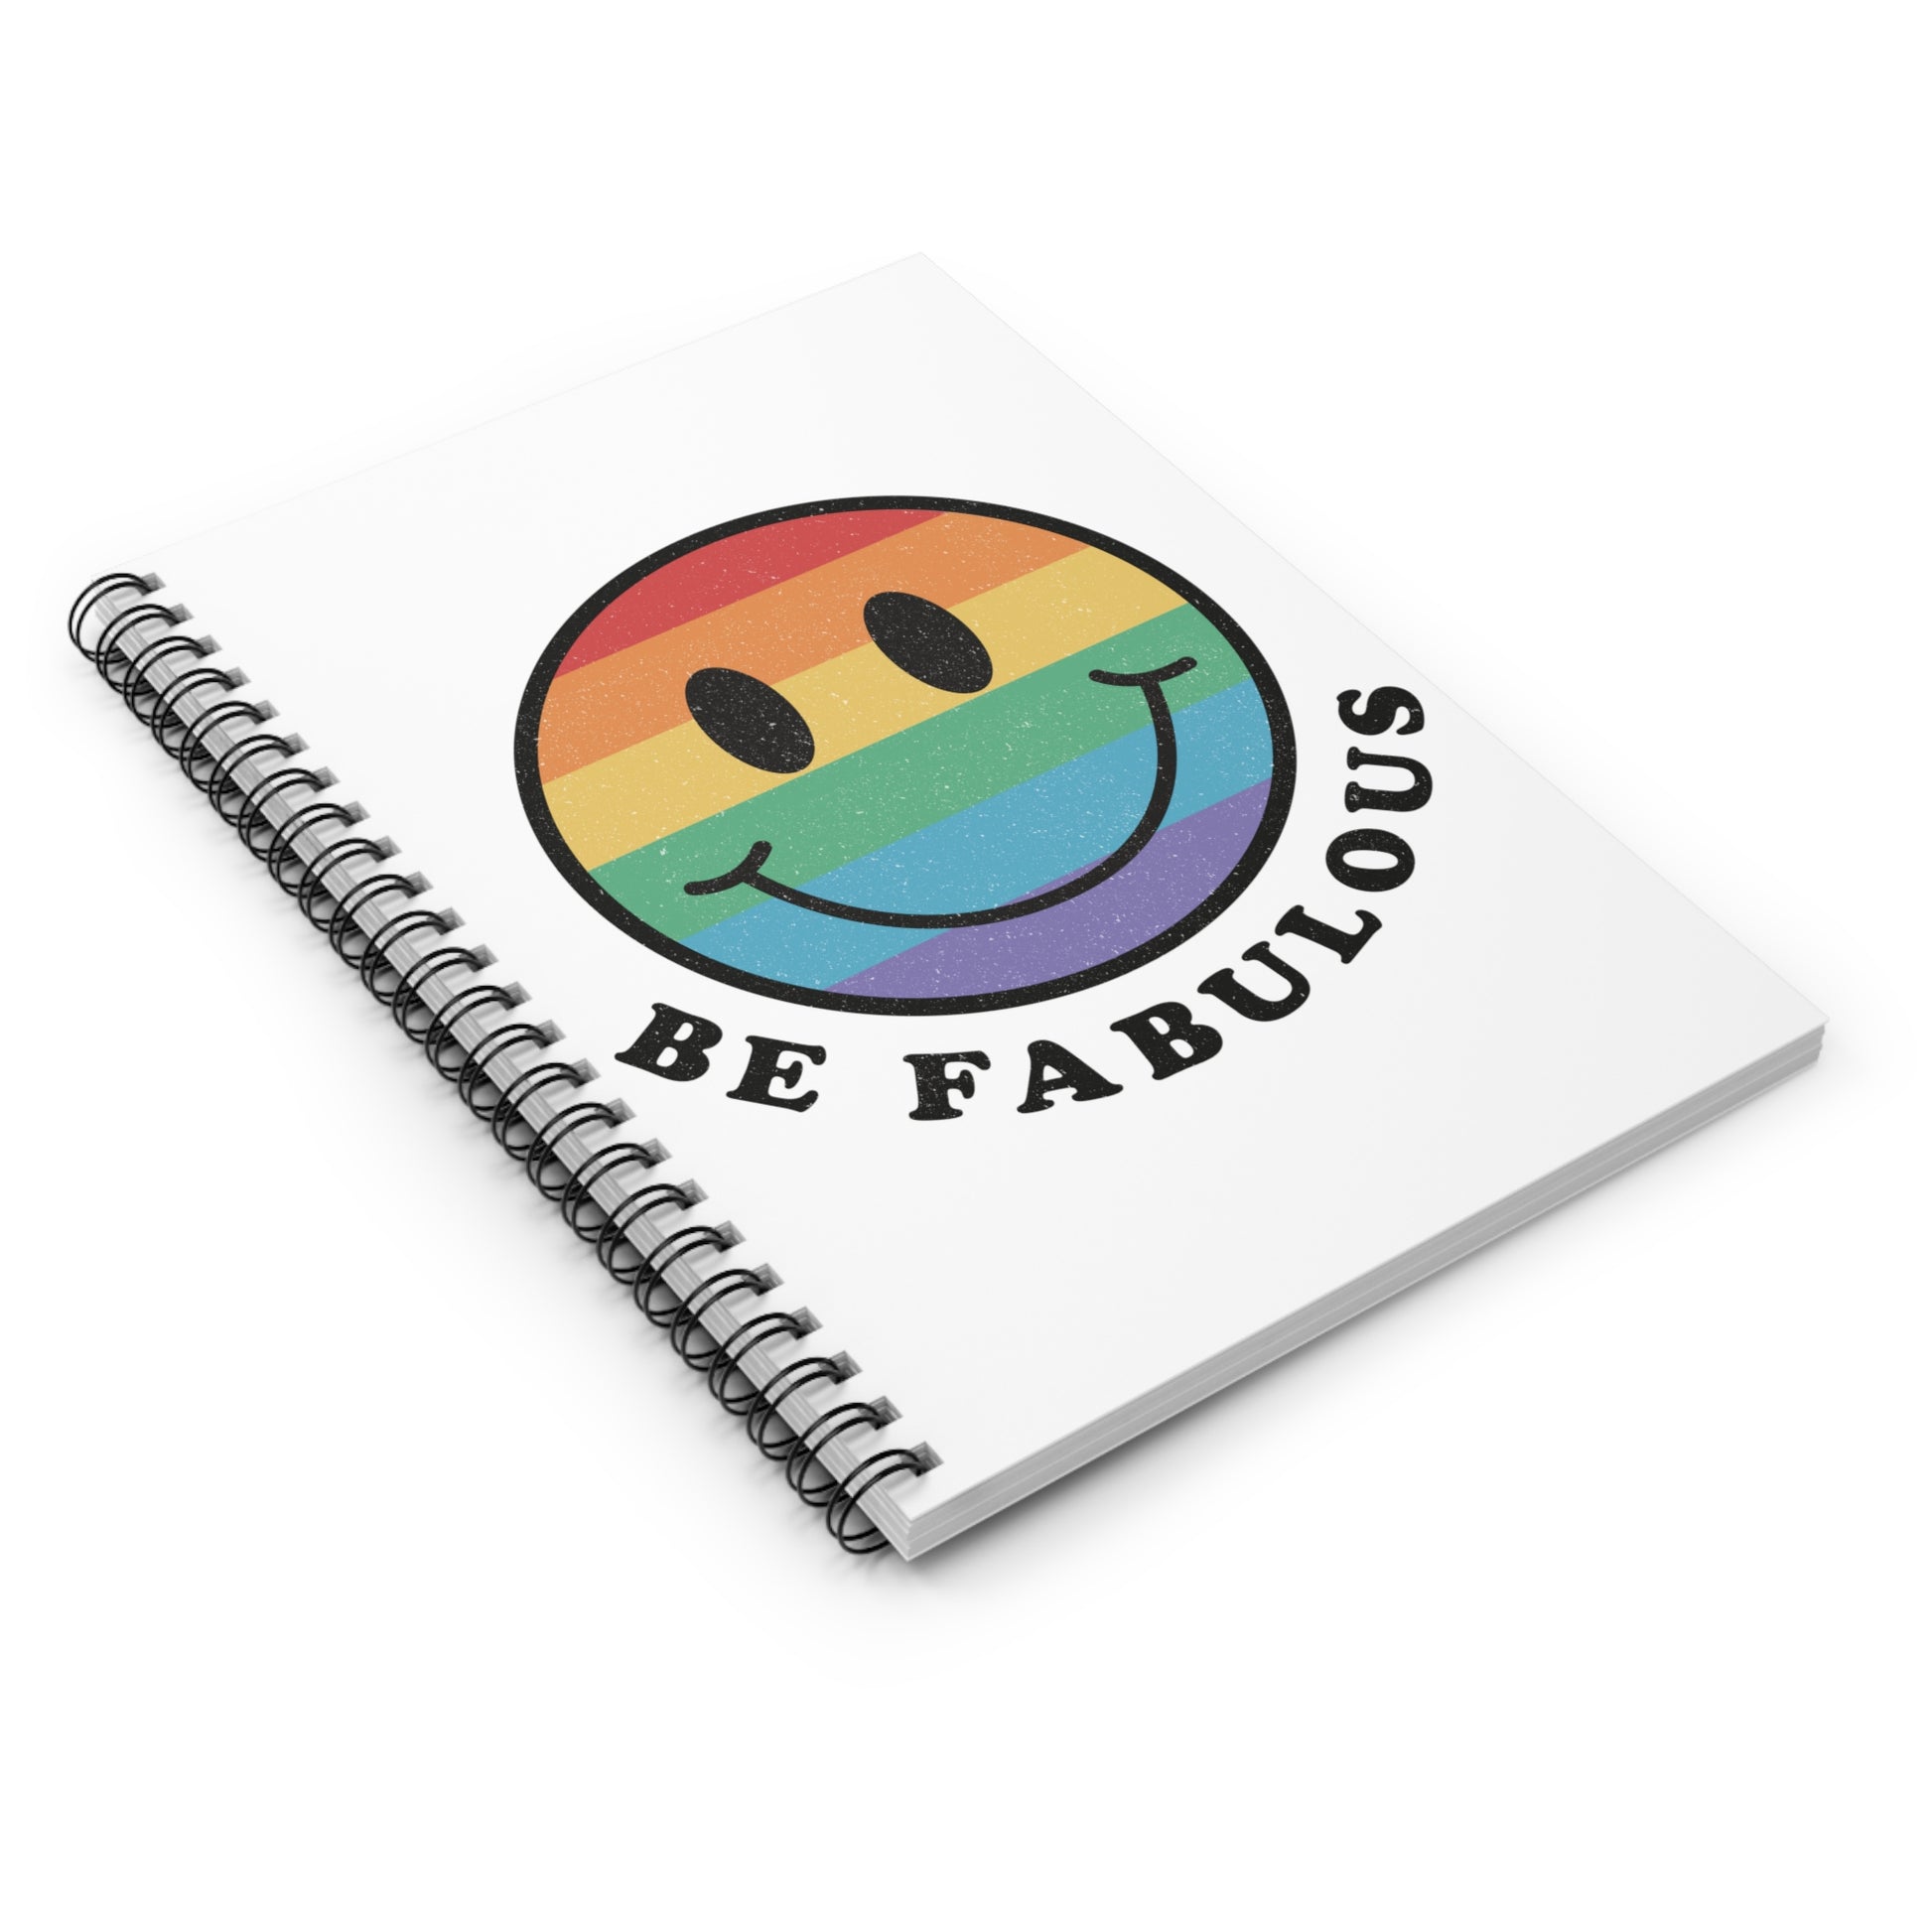 Be Fabulous: Spiral Notebook - Log Books - Journals - Diaries - and More Custom Printed by TheGlassyLass